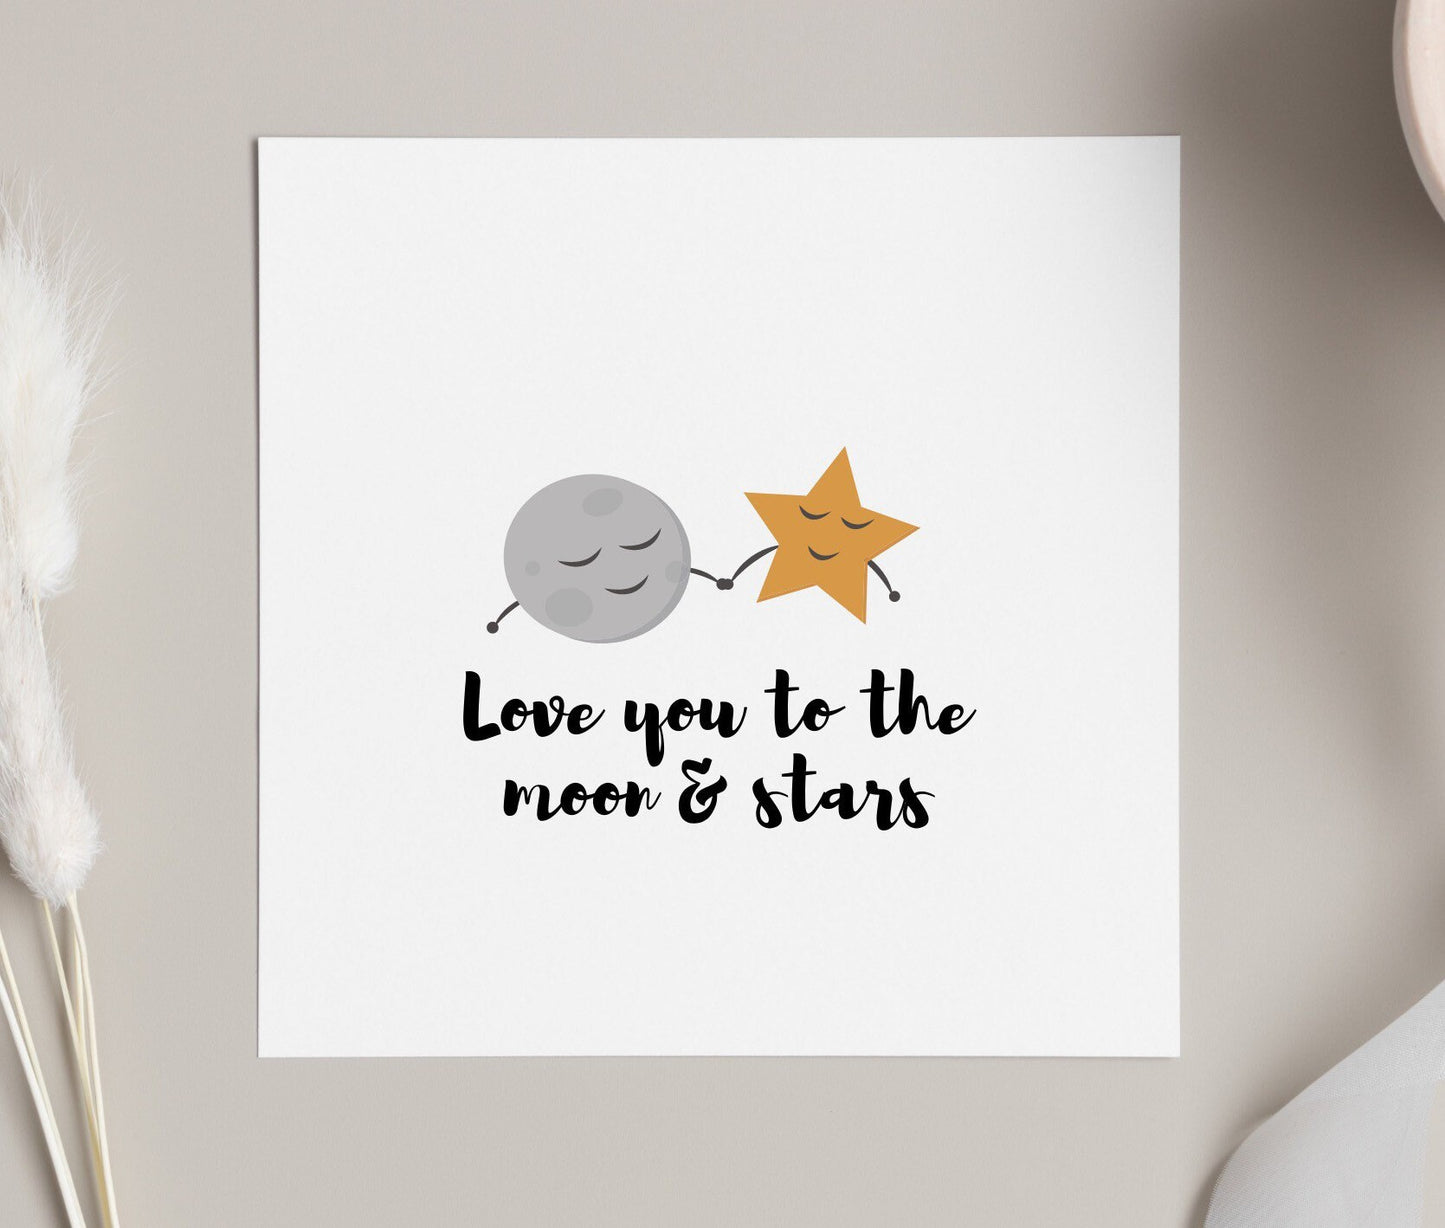 Love you to the moon and stars card, Valentine’s Day card, anniversary card, cute valentine cards for boyfriend girlfriend